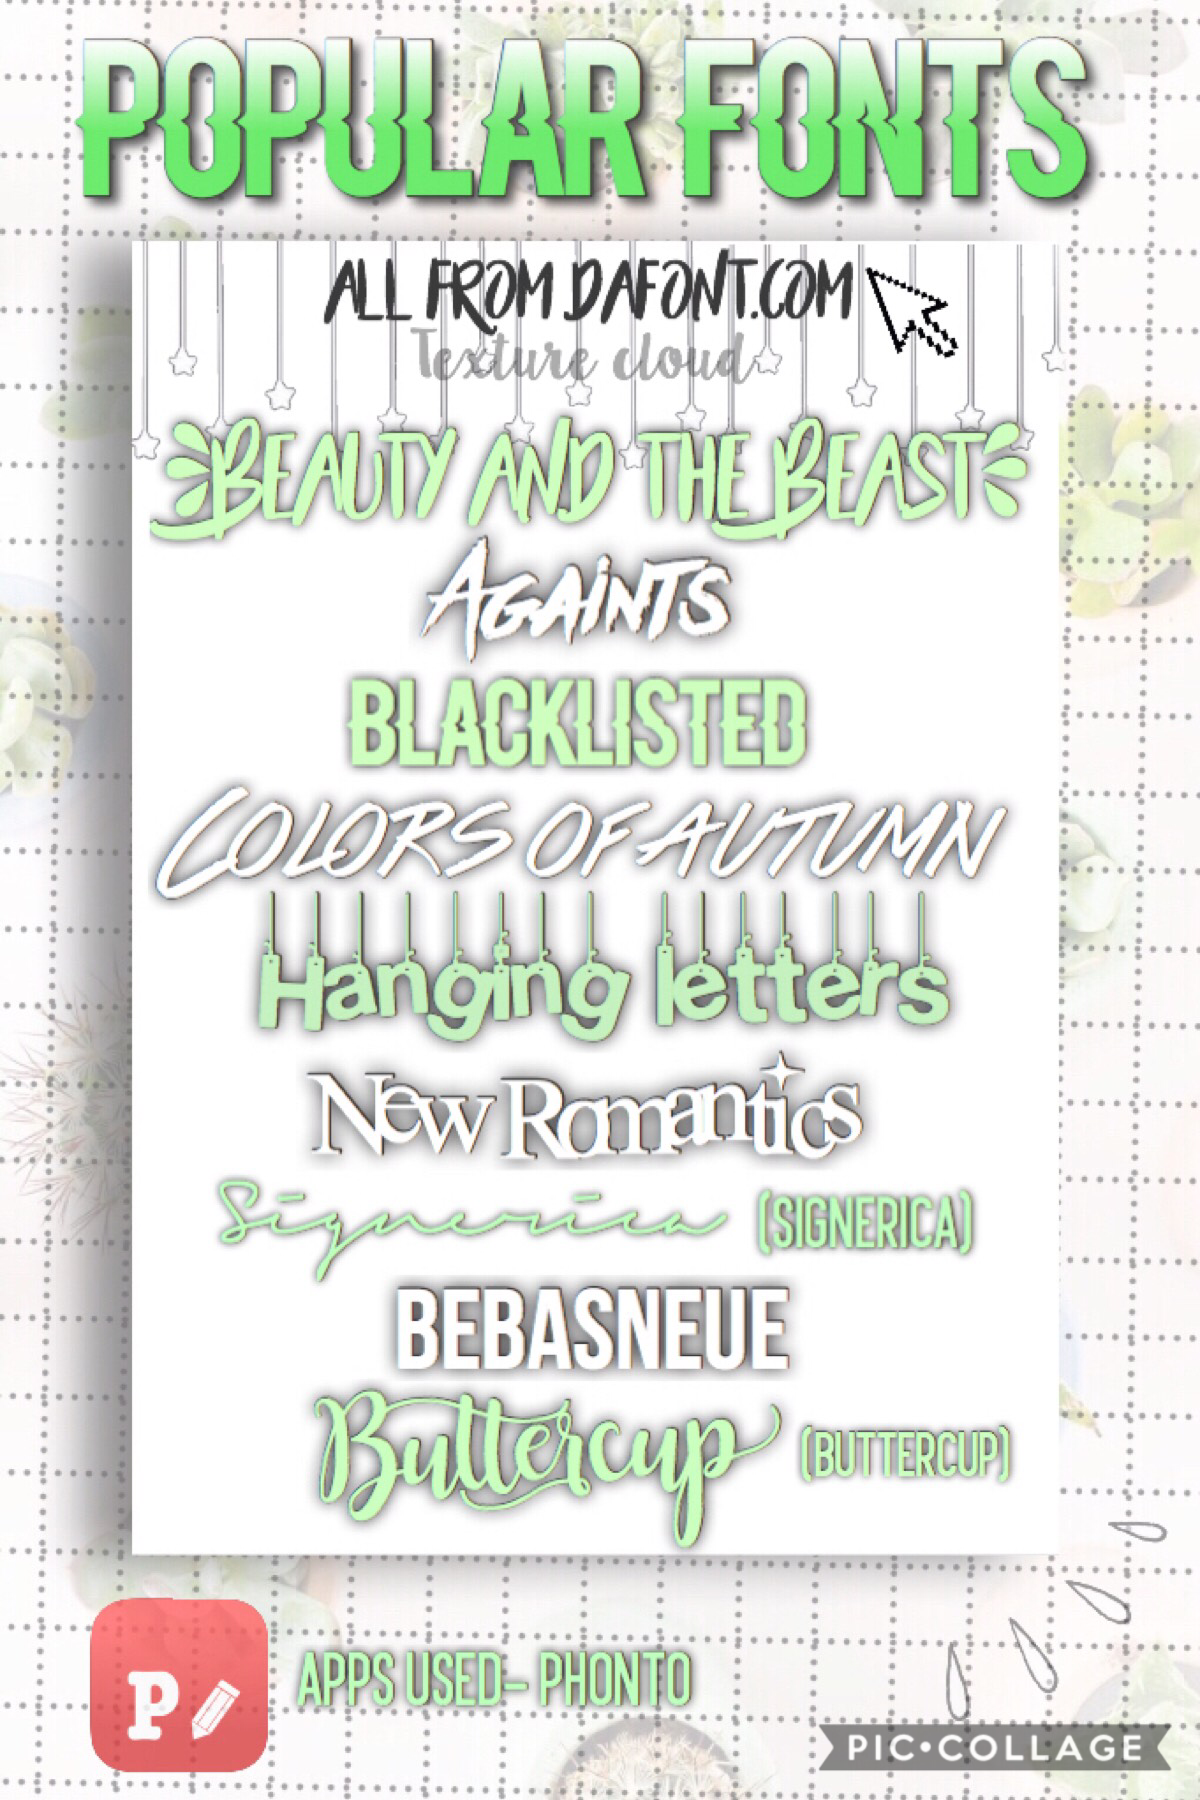 🍃Popular Fonts🍃
If you don’t know how to download font, look in the comments for a detailed description. 

Links to all also in comments 💕 enjoy! 
